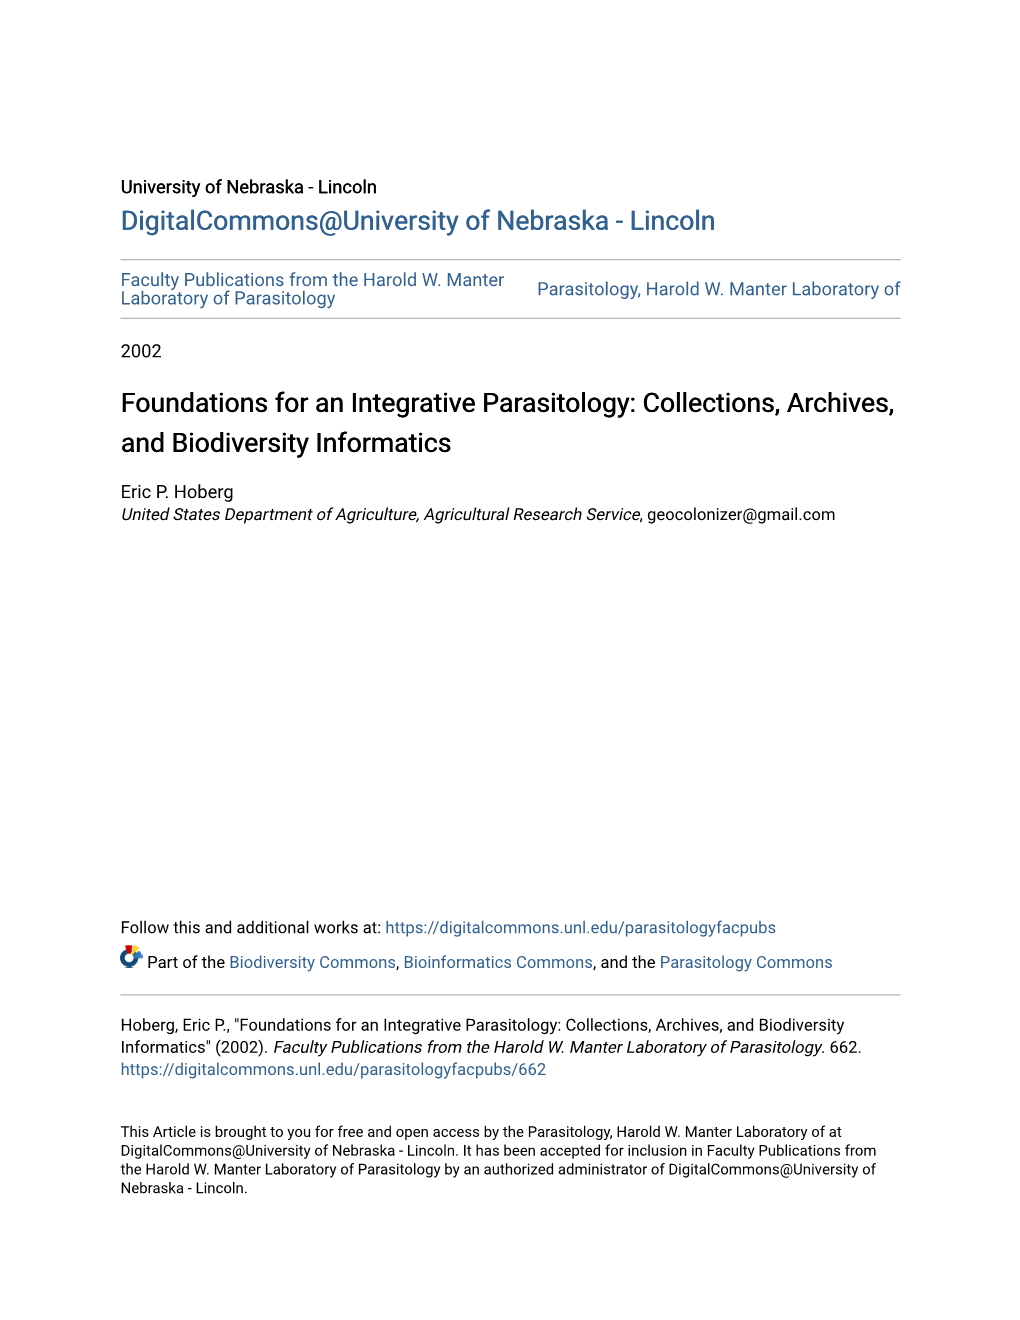 Foundations for an Integrative Parasitology: Collections, Archives, and Biodiversity Informatics